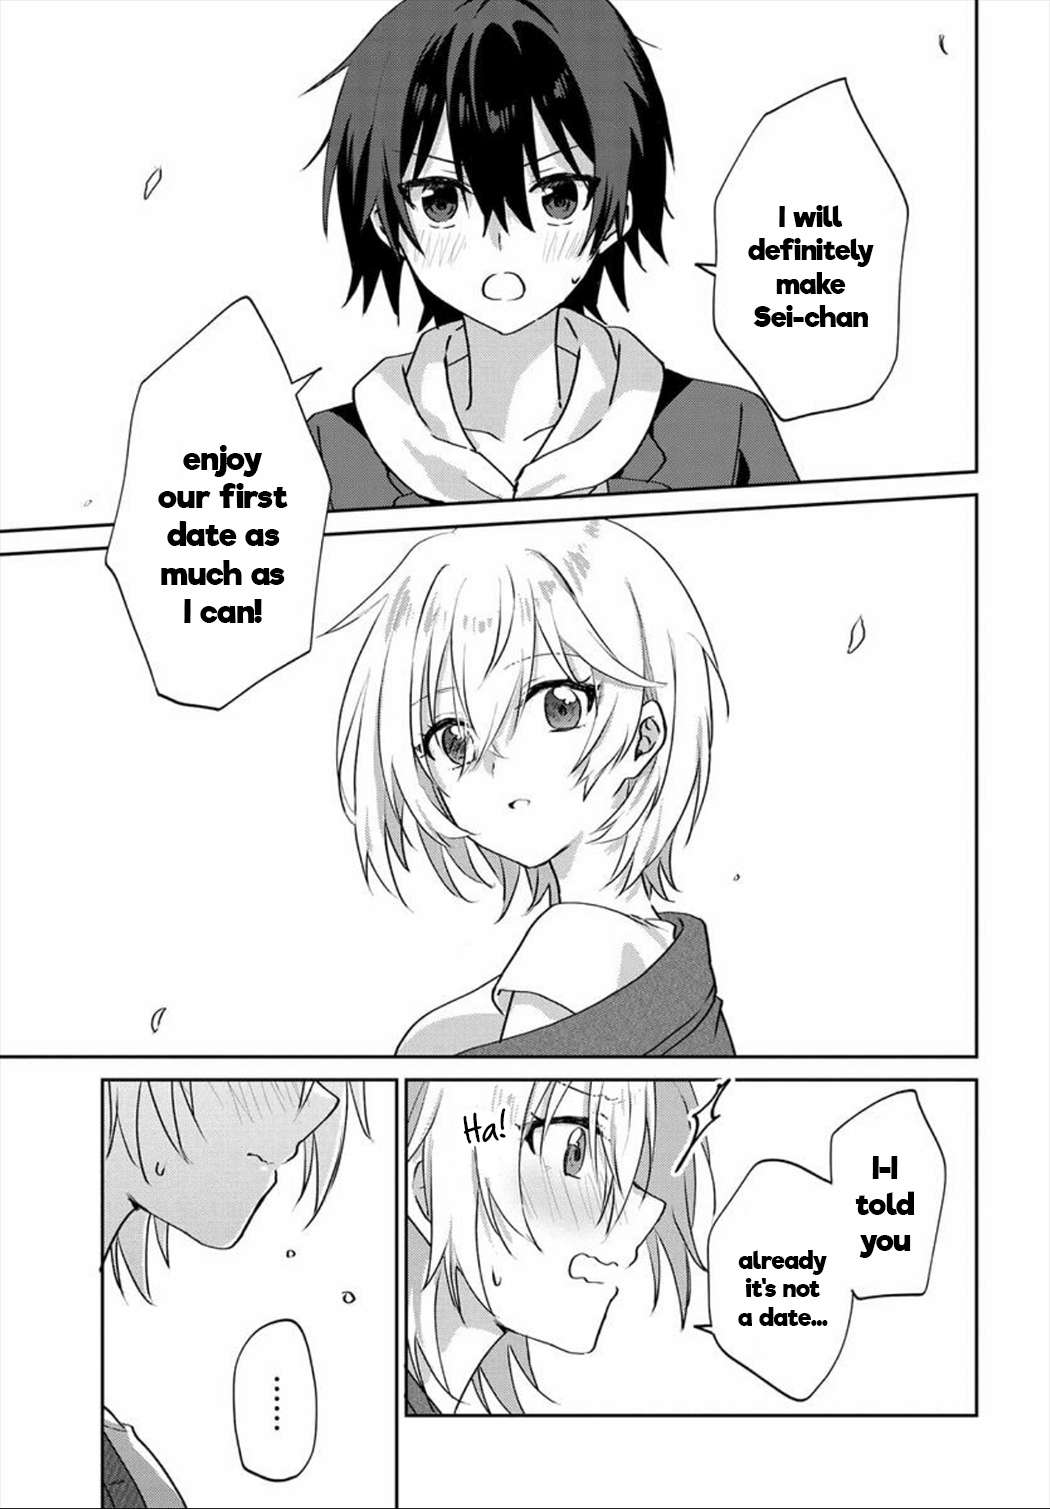 Since I’Ve Entered The World Of Romantic Comedy Manga, I’Ll Do My Best To Make The Losing Heroine Happy - chapter 6.2 - #2